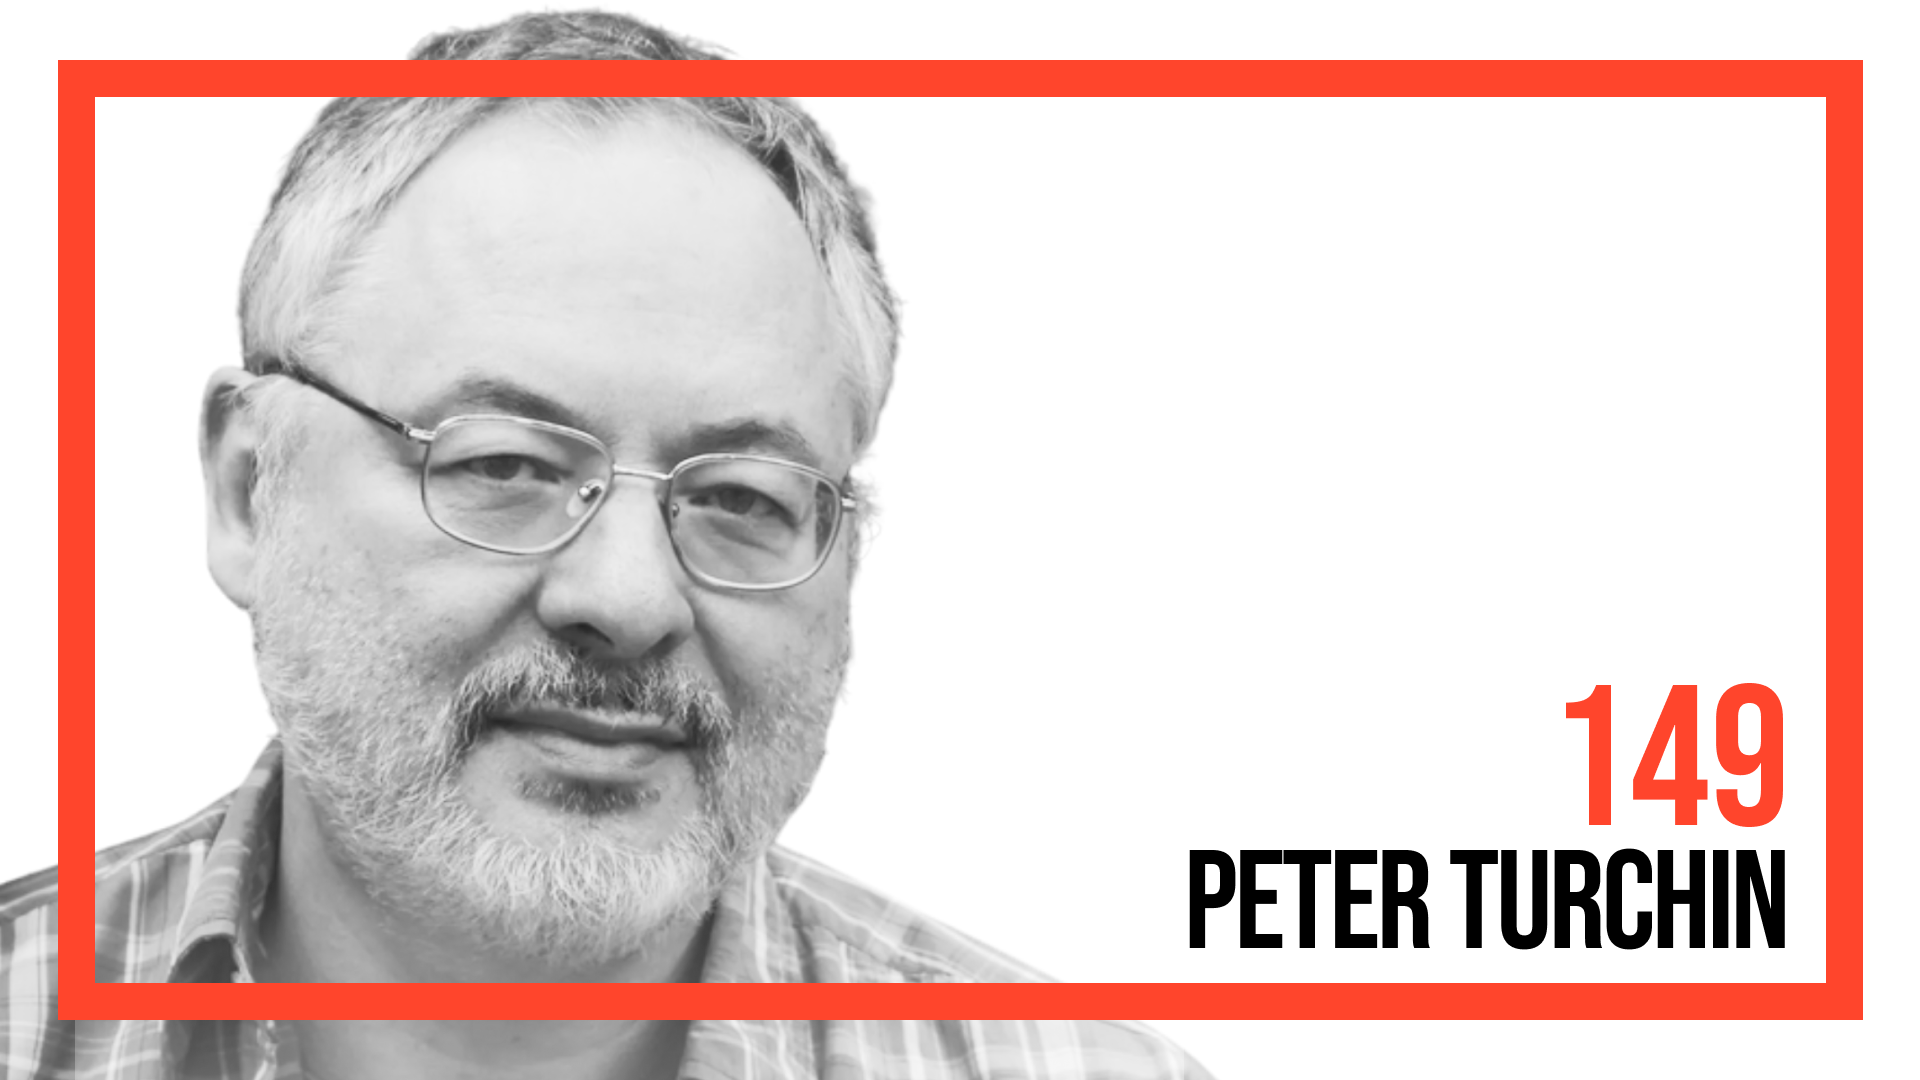 Peter Turchin is a complexity scientist and one of the founders of cliodynamics — a new, cross-disciplinary field that applies mathematics and big d